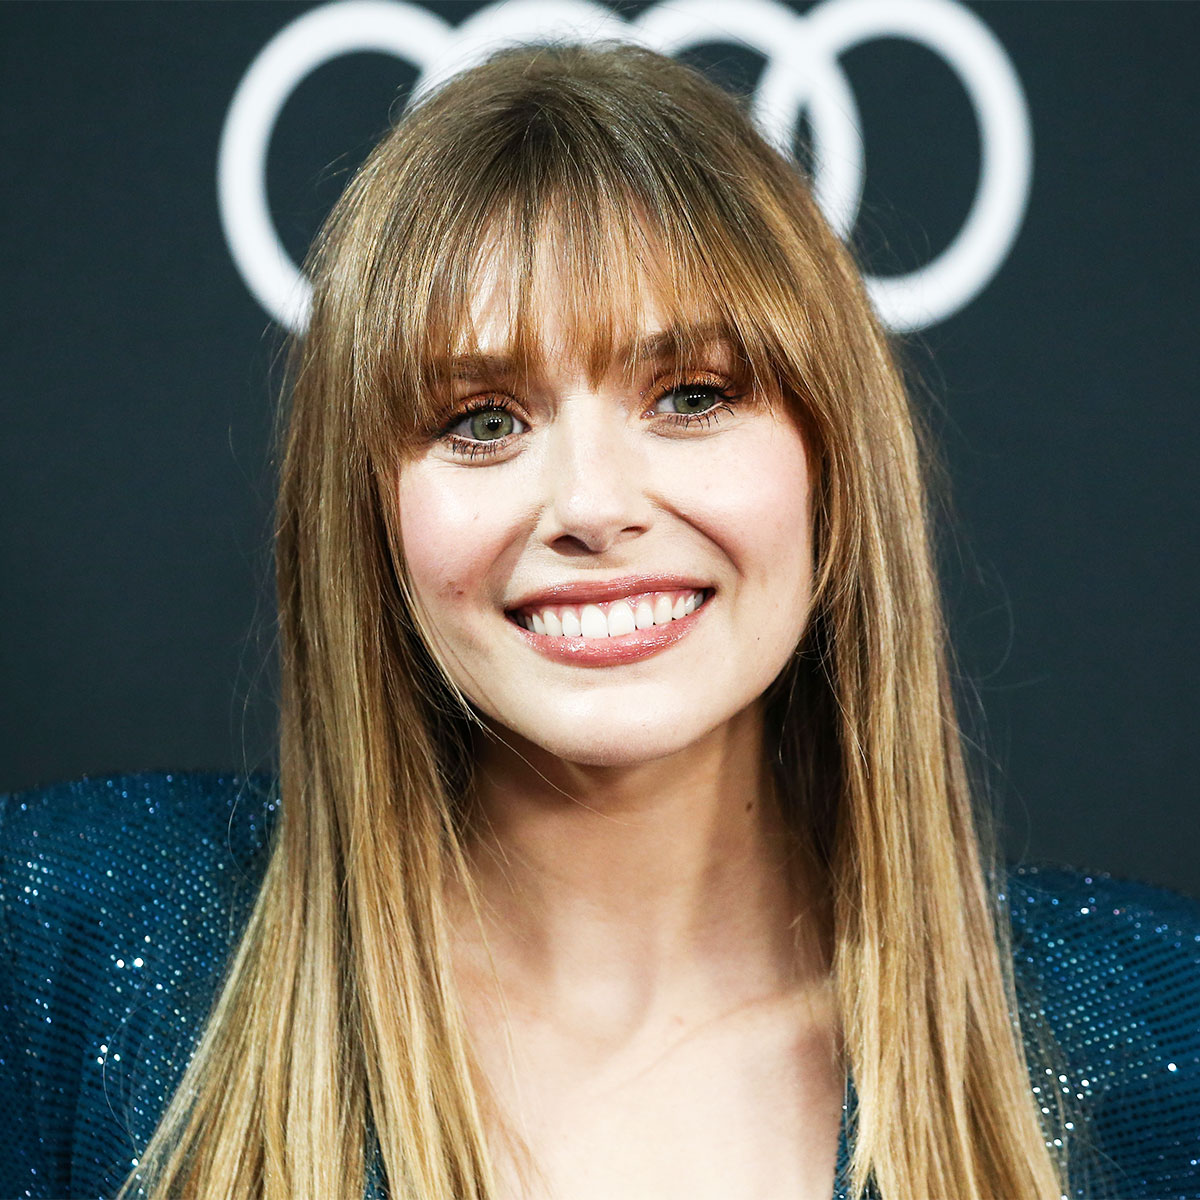 The 'Wispy Bangs' Hairstyle You Should Ask For This Fall Because It's So  Flattering - SHEfinds